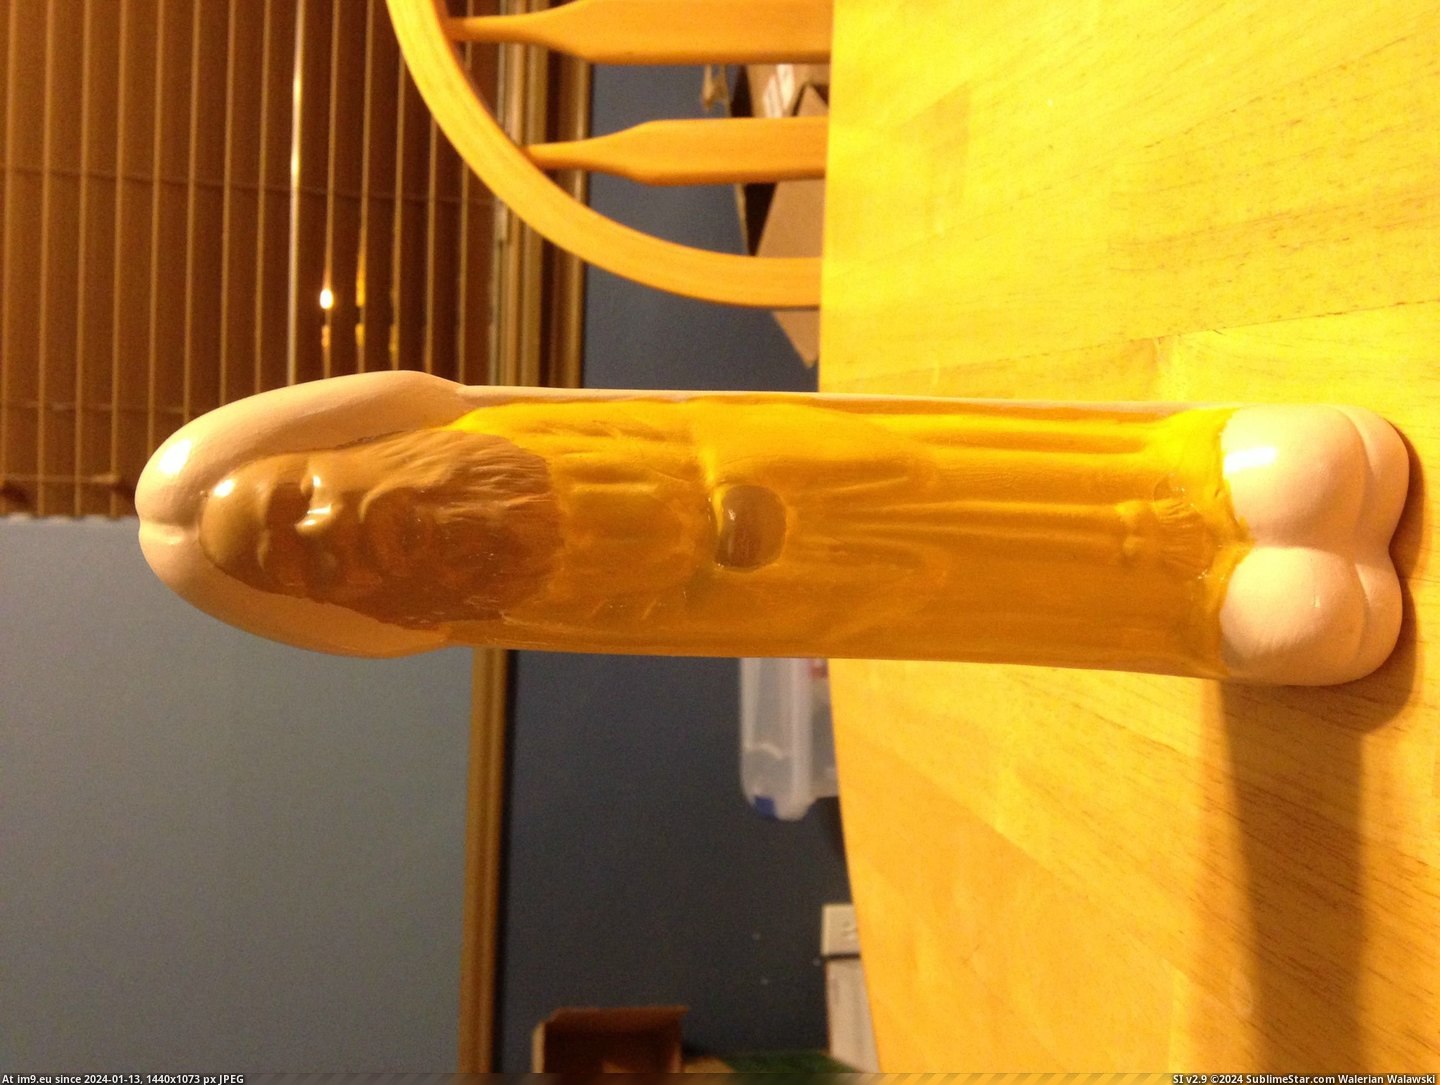 #Wtf #Art #Great #Out #Penis #Gave #Grandmother #Gifts #Got #She #Family #Boyfriend [Wtf] My Great-Grandmother got a boyfriend...so she made this penis art and gave it out as gifts to the family. [NSFW] 4 Pic. (Изображение из альбом My r/WTF favs))